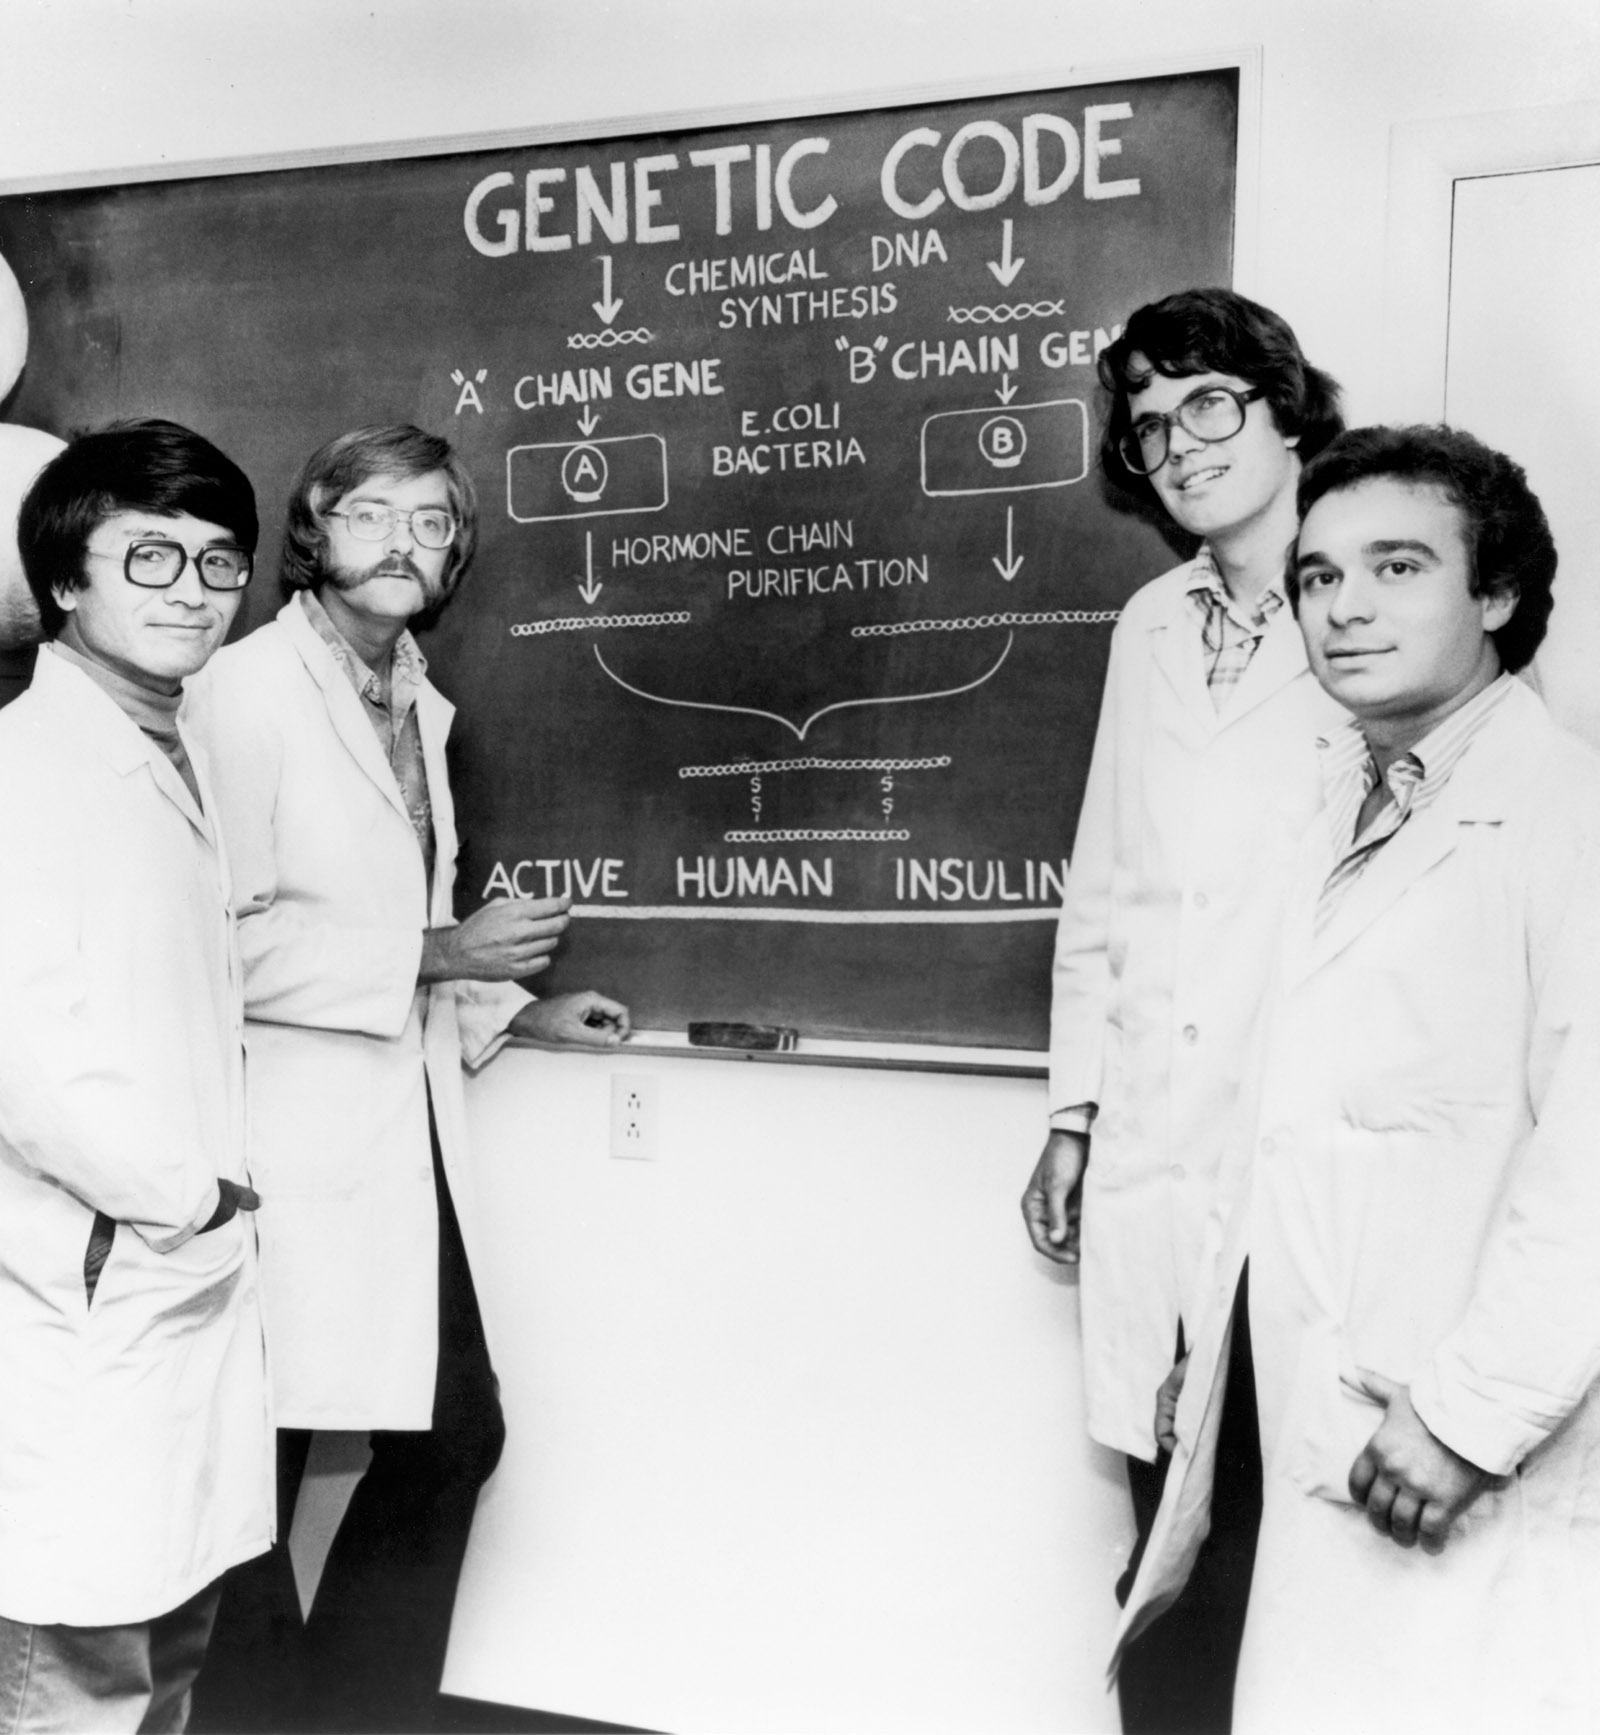 Members of the team that first synthesized human insulin, City of Hope National Medical Center